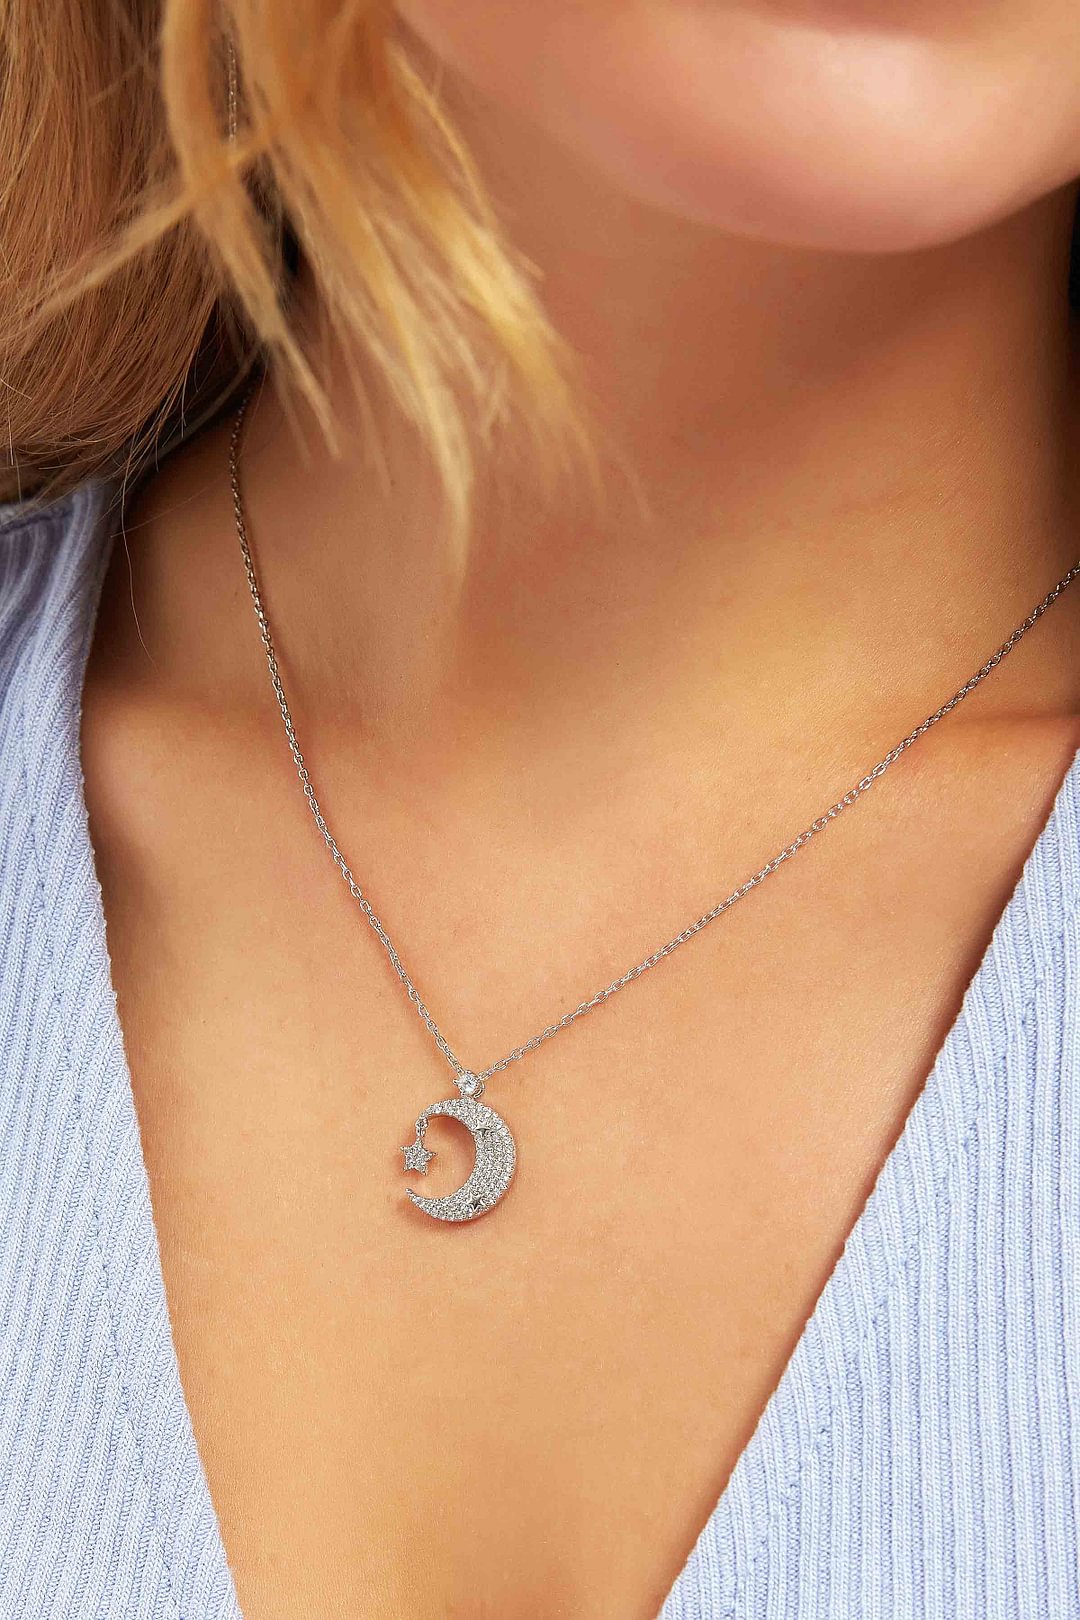 Crescent Moon Shaking Star "Hold Me Tight" 14K Gold Pendant Necklace